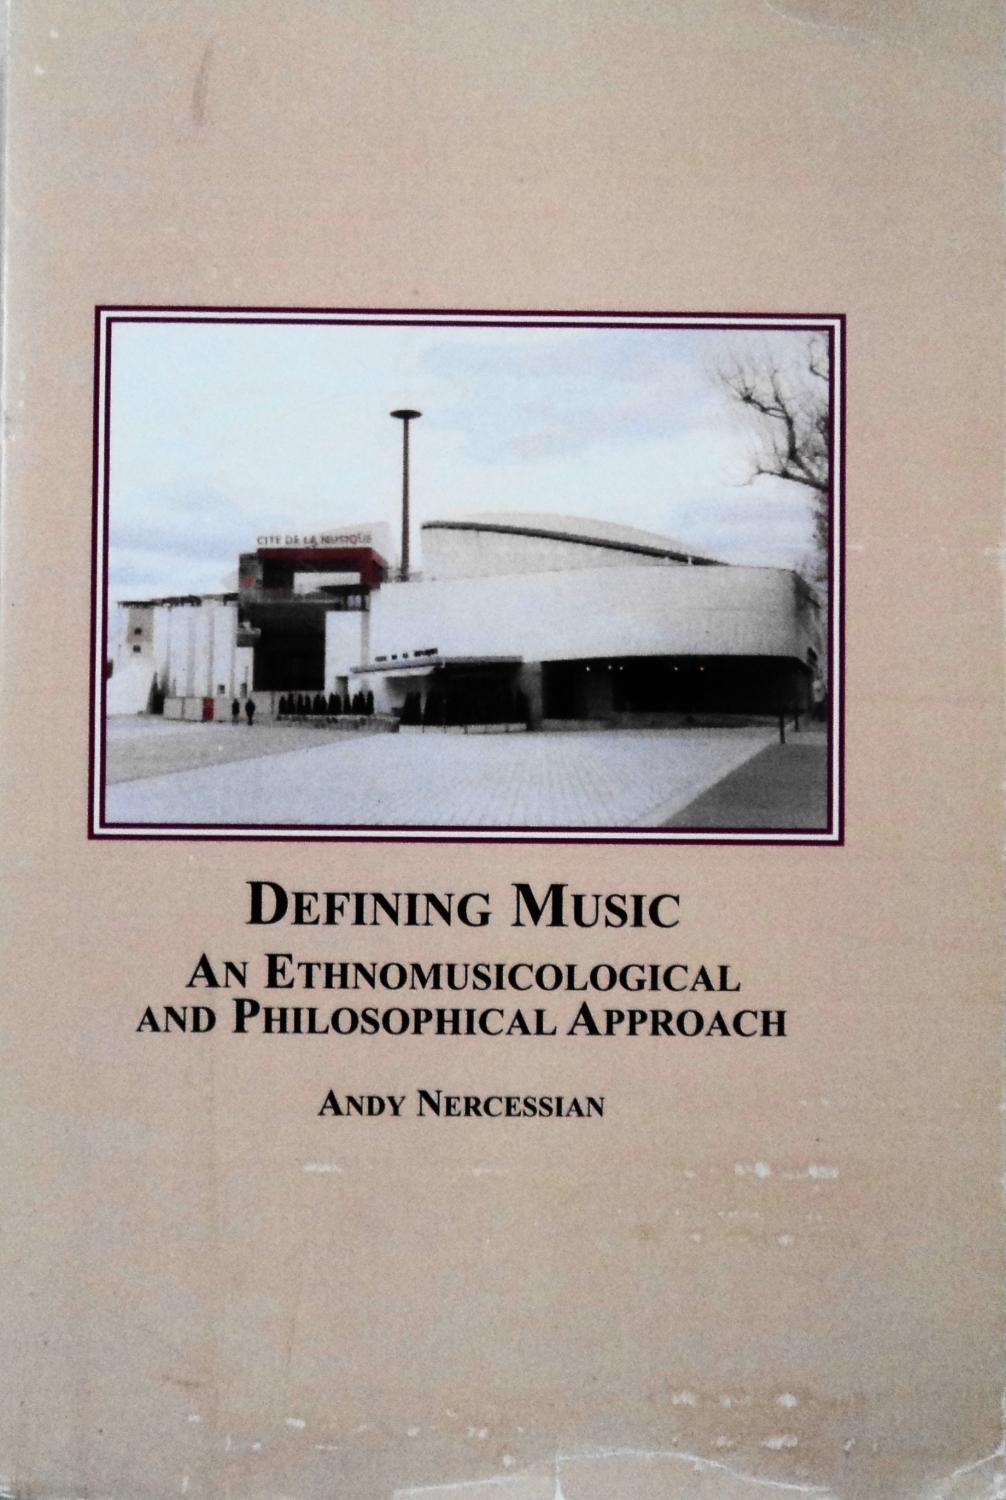 Defining Music: An Ethnomusicological and Philosophical Approach - Andy Nercessian